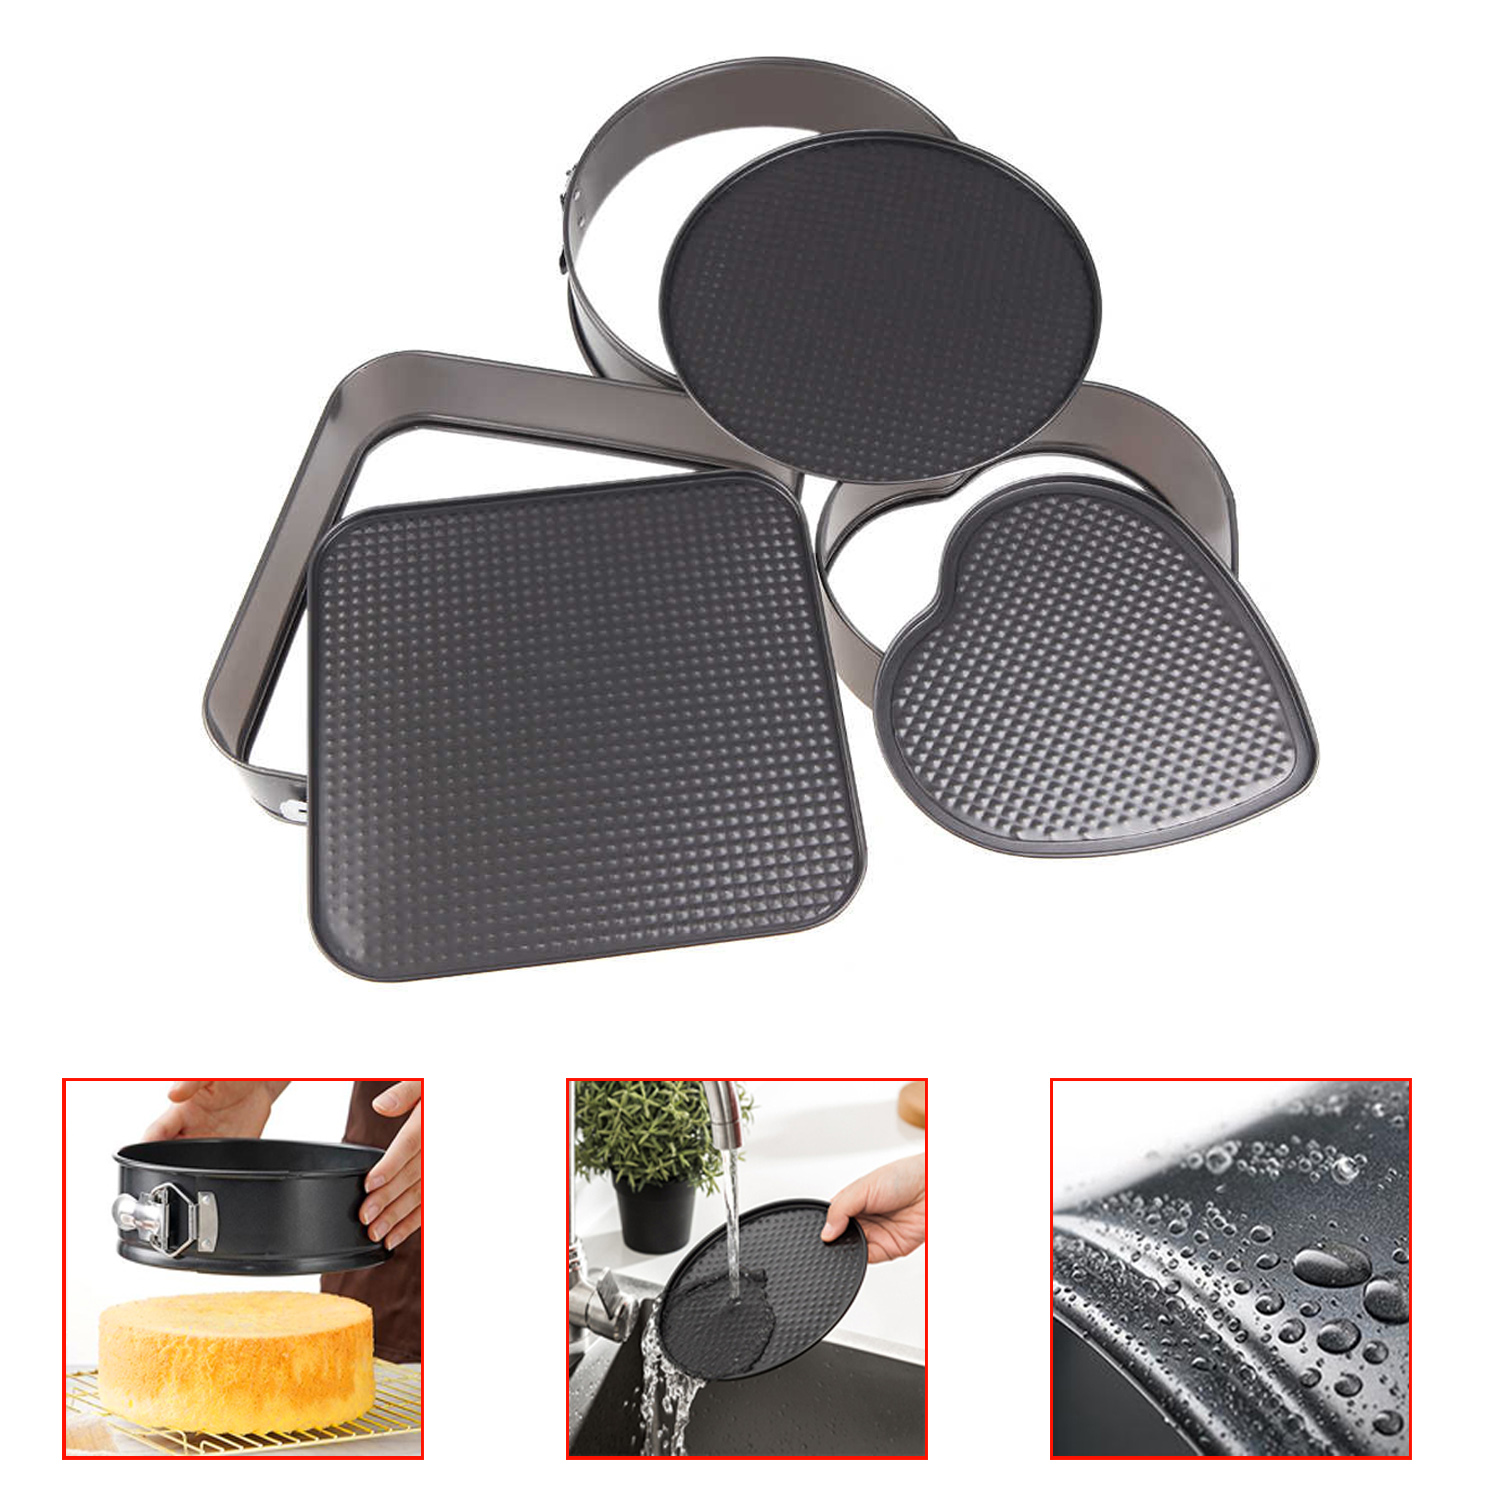 3 Shape Heart Round Square Springform Mould Non-stick Leakproof Round Cake Mould Bakeware Round Non-stick Baking Pans 